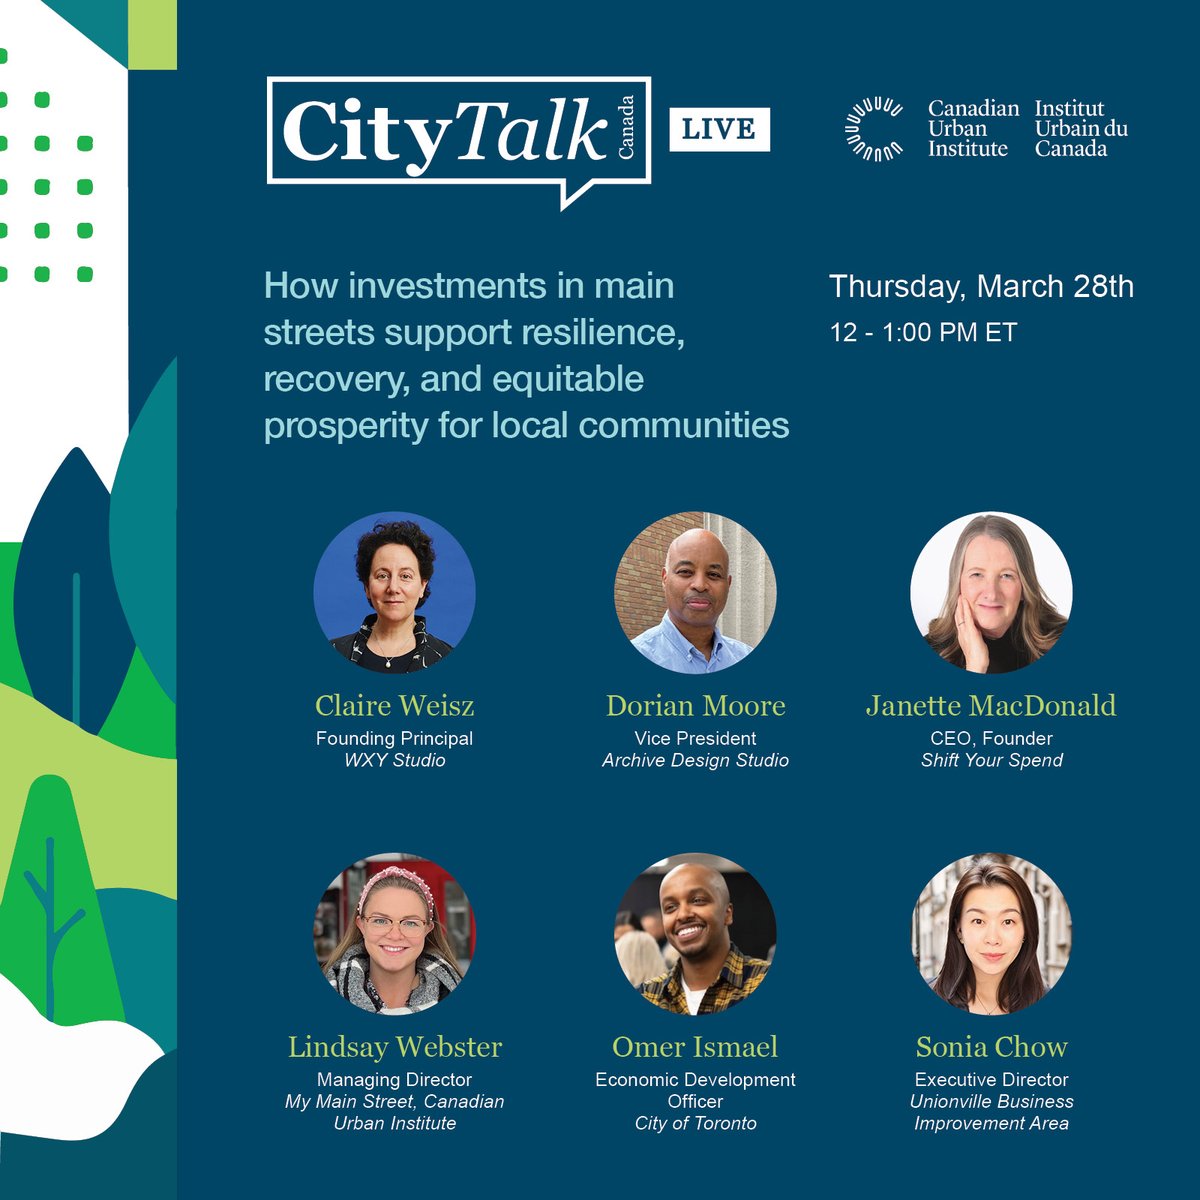 Join us on Thursday, March 28th from 12:00 PM - 1:00 PM ET In this CityTalk, we’ll explore why main street businesses matter to Canada’s greater economy. Register now at: hubs.la/Q02qsmmk0